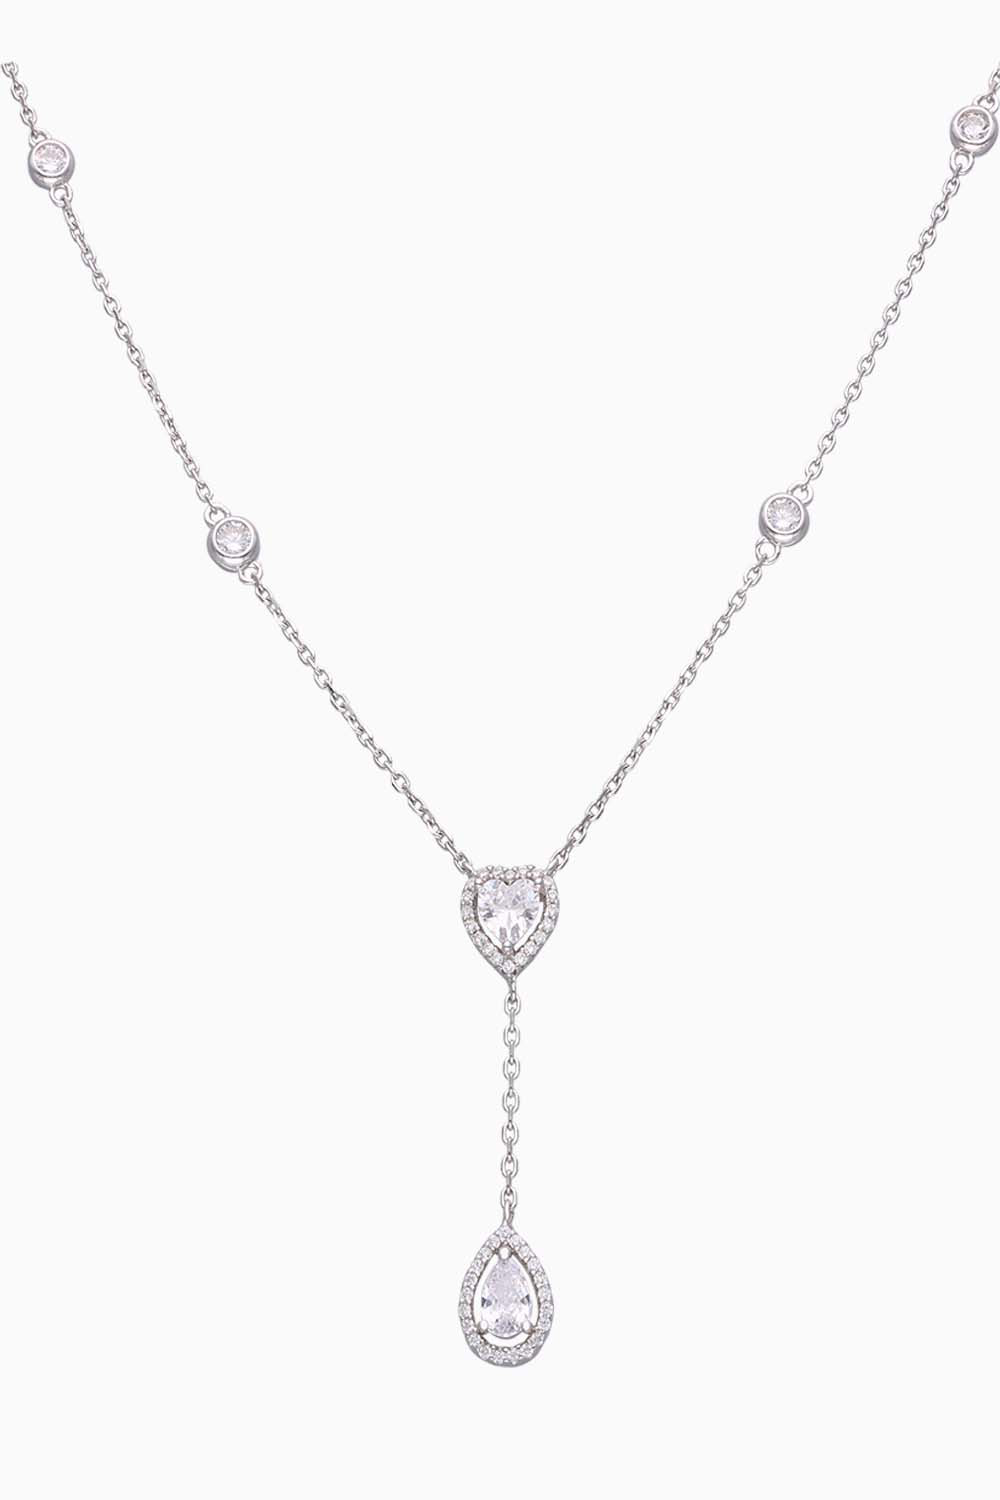 Stylish Crystal Hearts Silver Chain Necklace